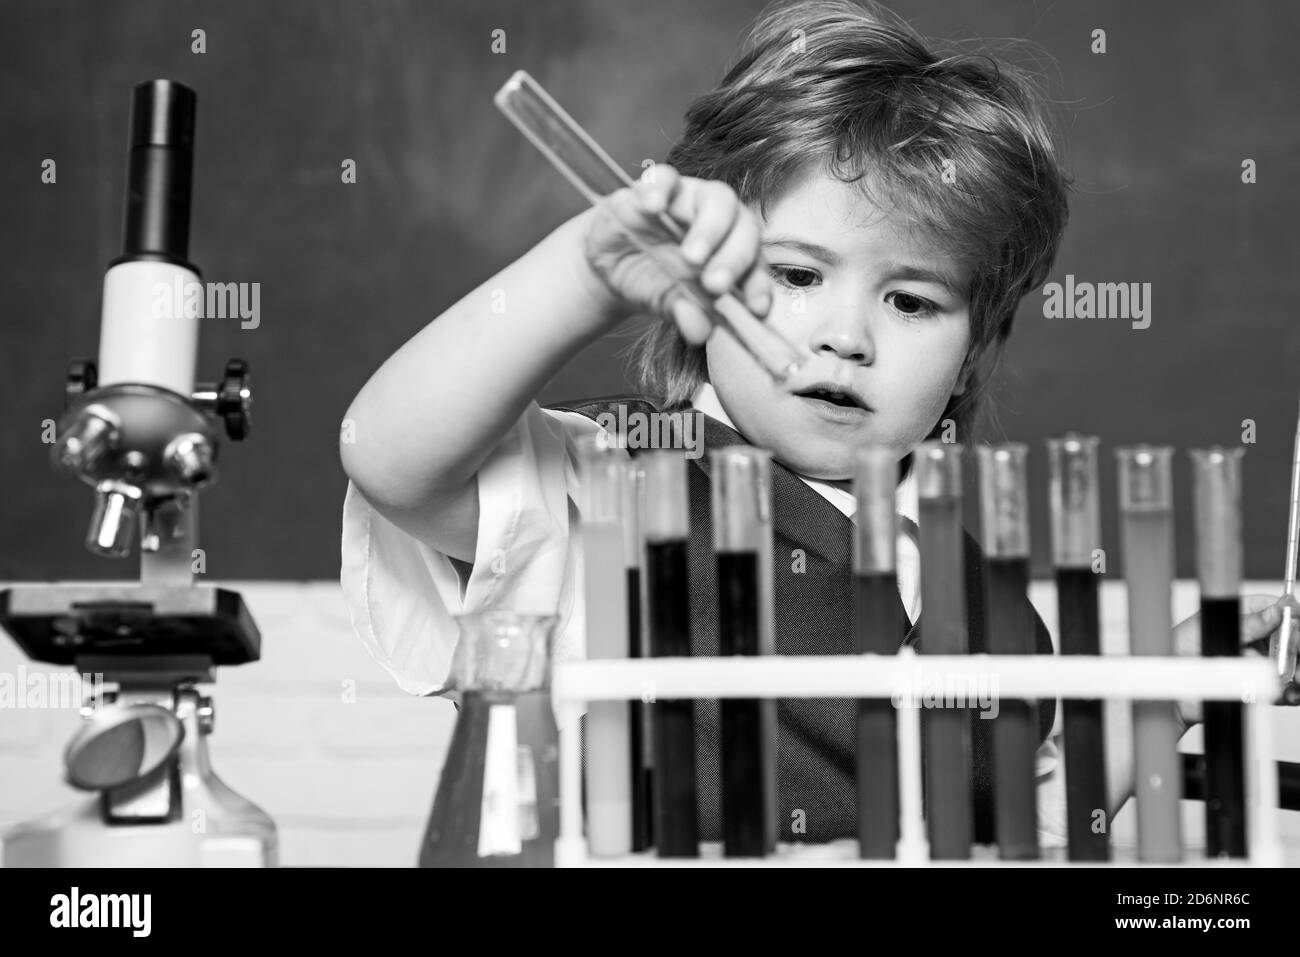 Chemistry science. September 1. Preschooler. Back to school. Science and education concept. Child from elementary school. What is taught in chemistry. Stock Photo